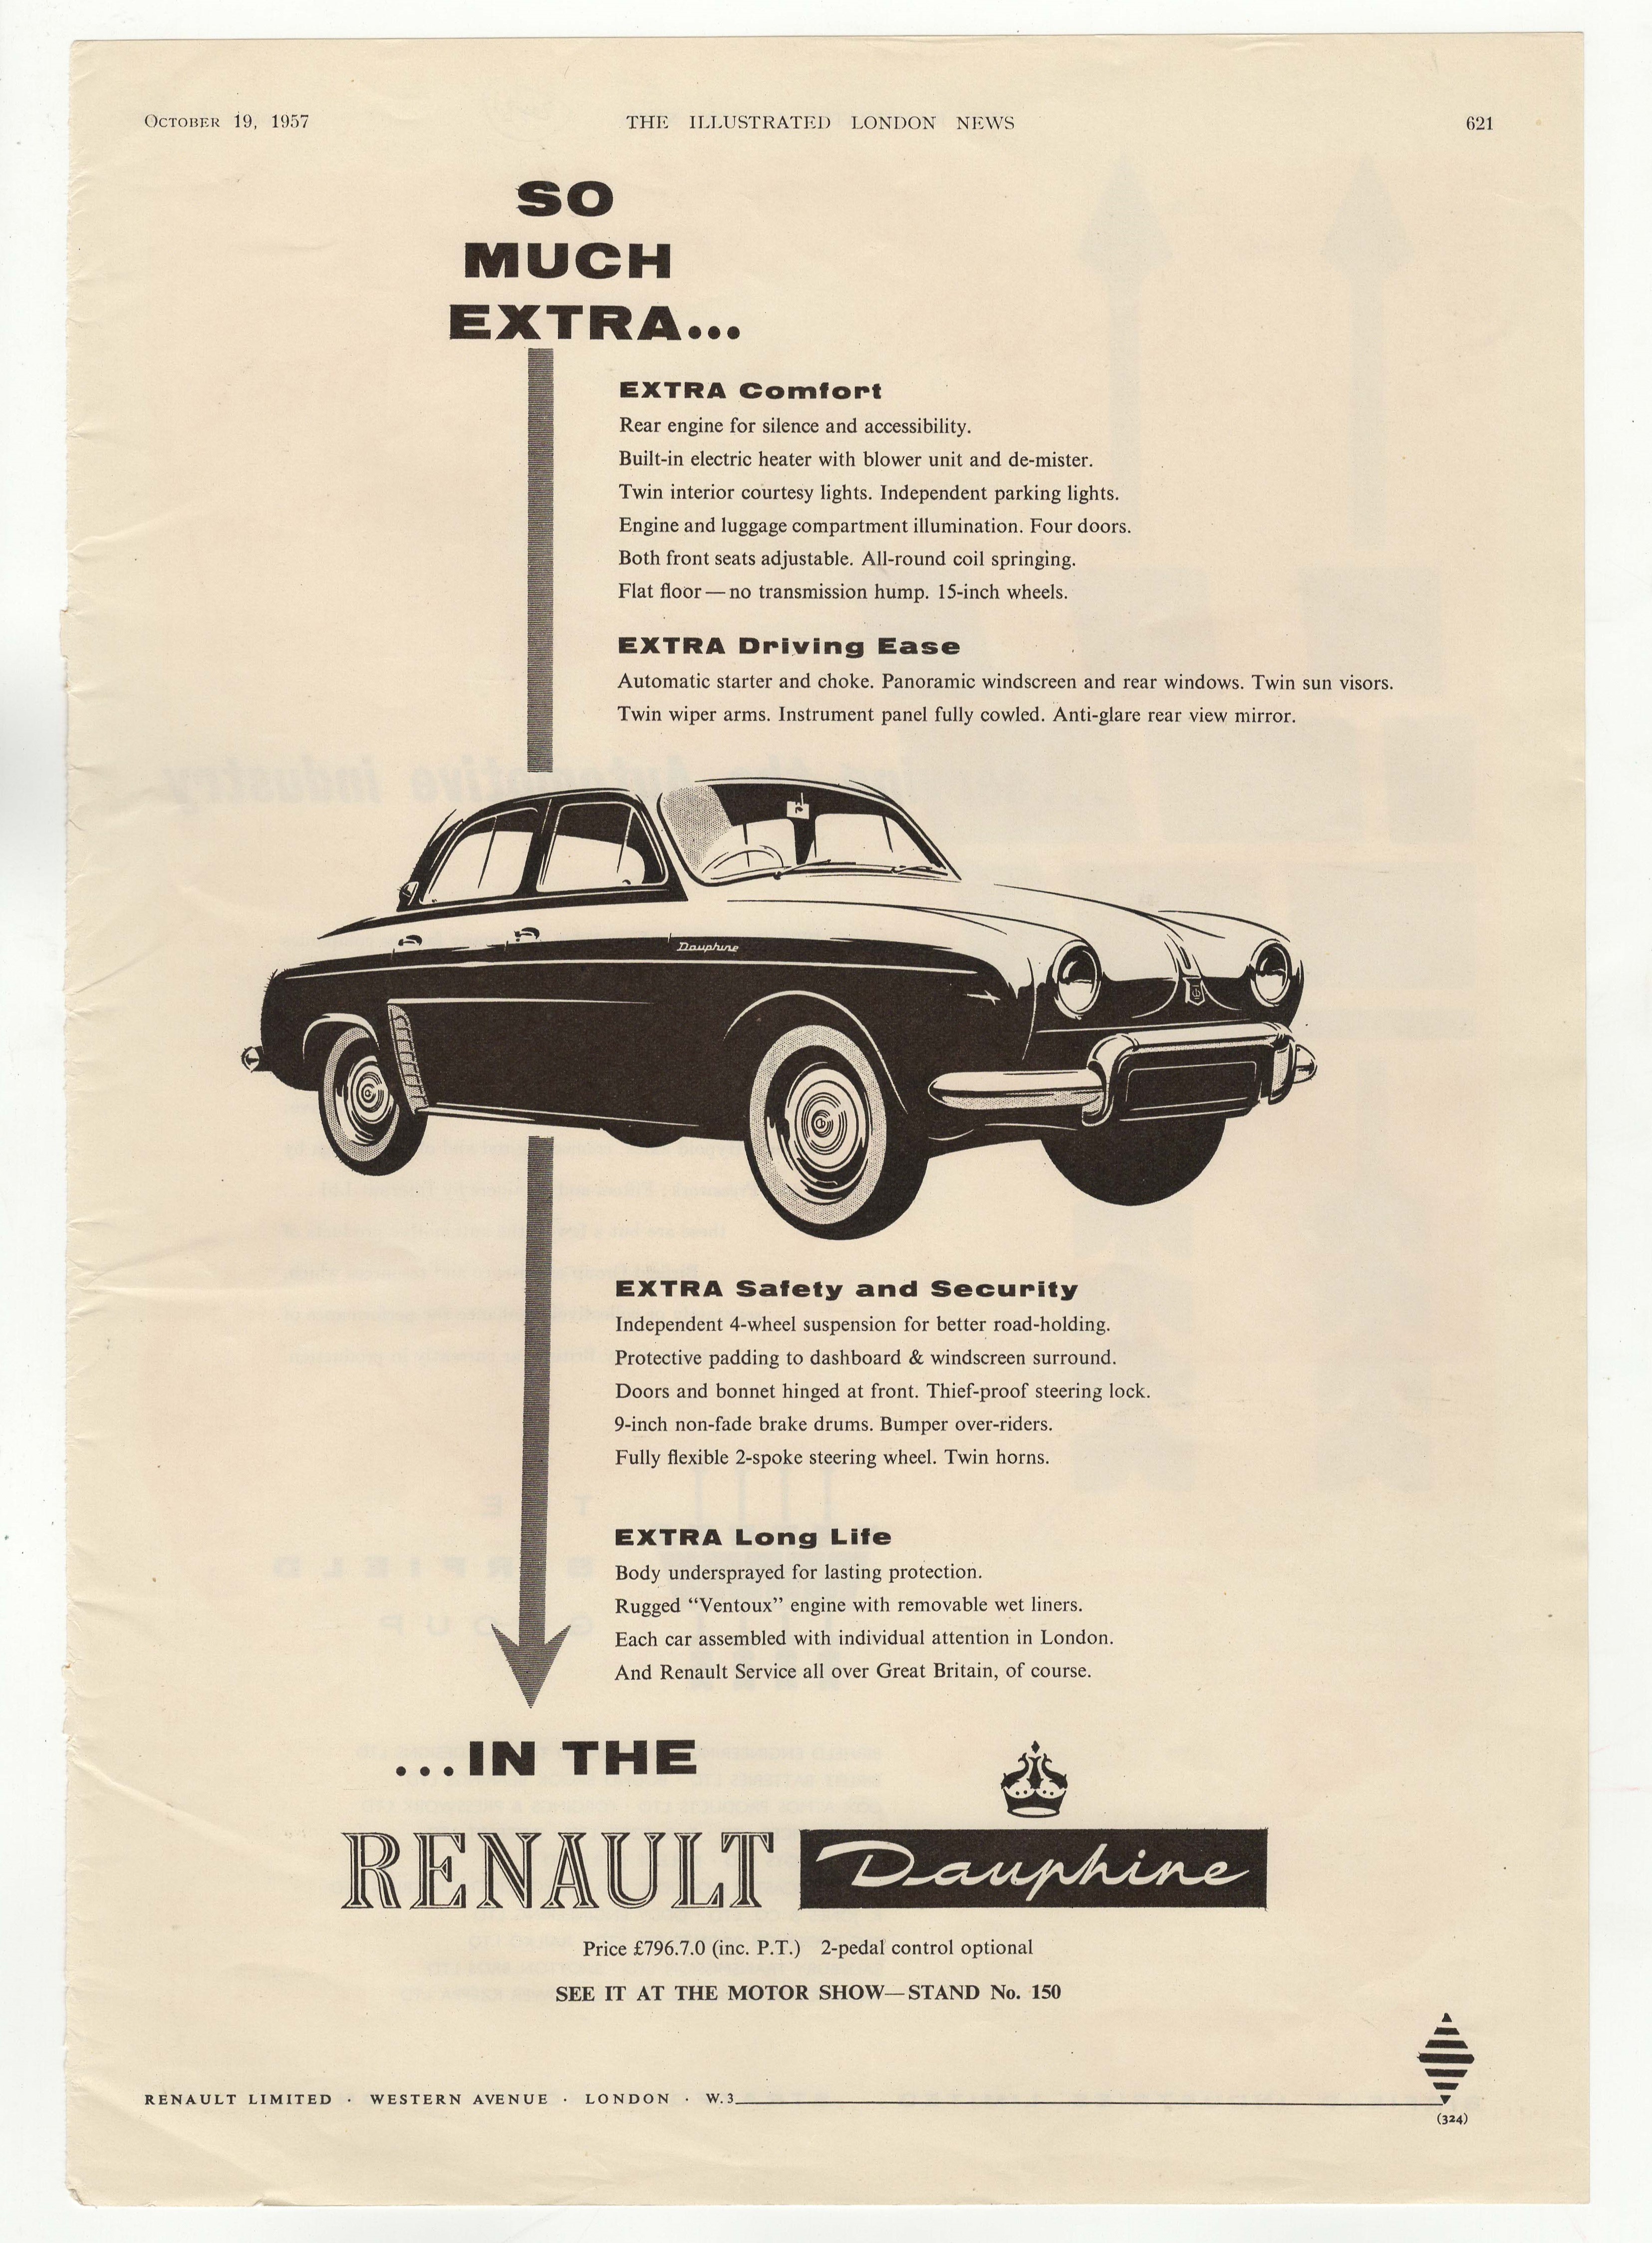 Renault 1957-full page black and white advertisement-Renault Dauphine-Motor Show Stand 150-10" x